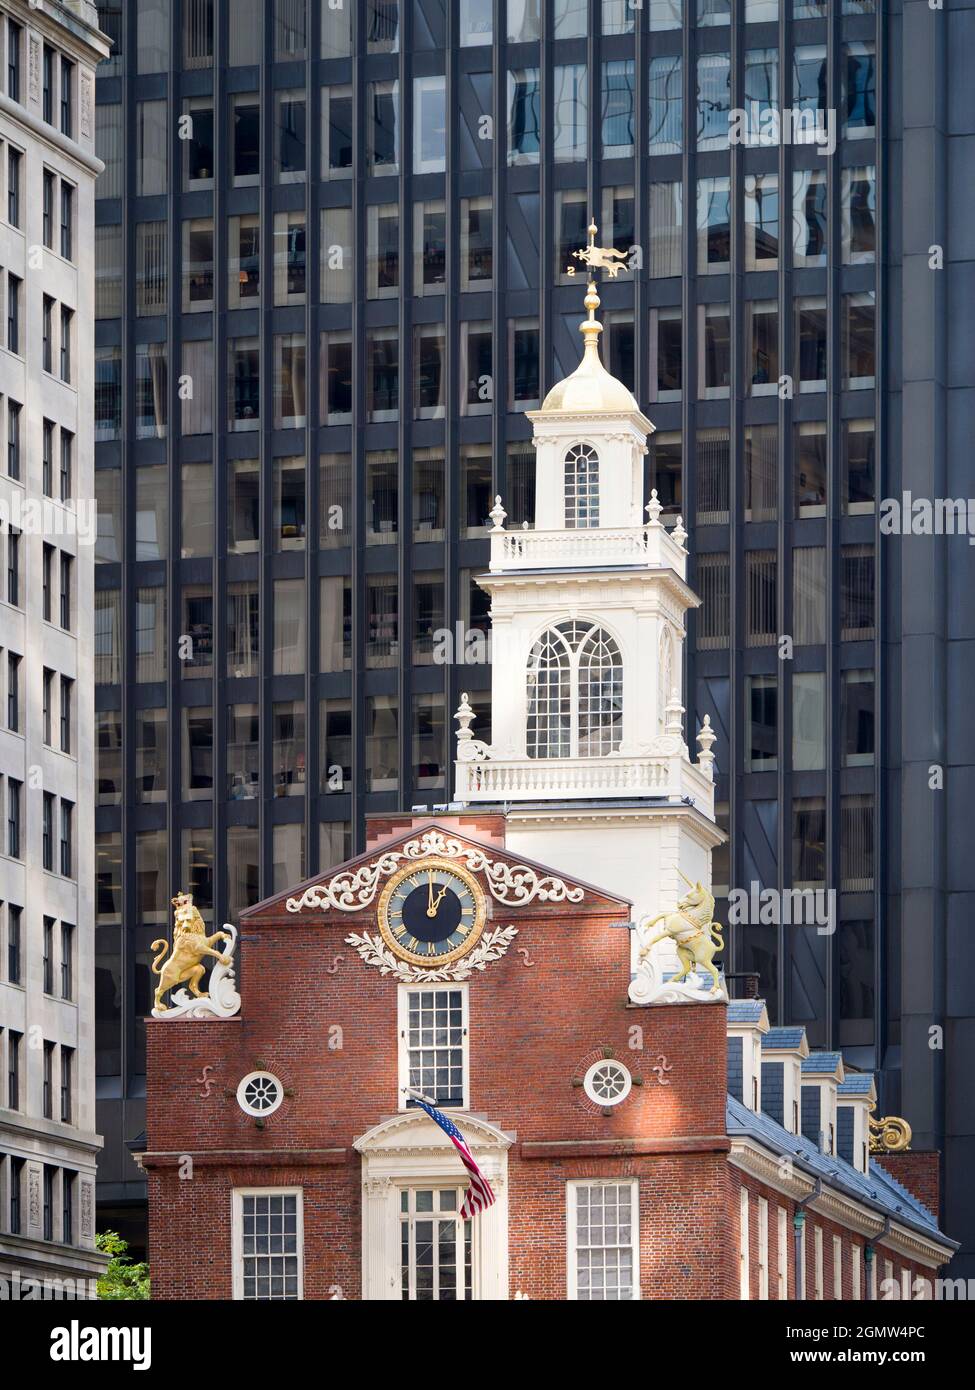 Boston, Mass, USA - November 2013; Built in 1713, the Old State House is a historic building in Boston, Massachusetts, which was was the seat of the M Stock Photo